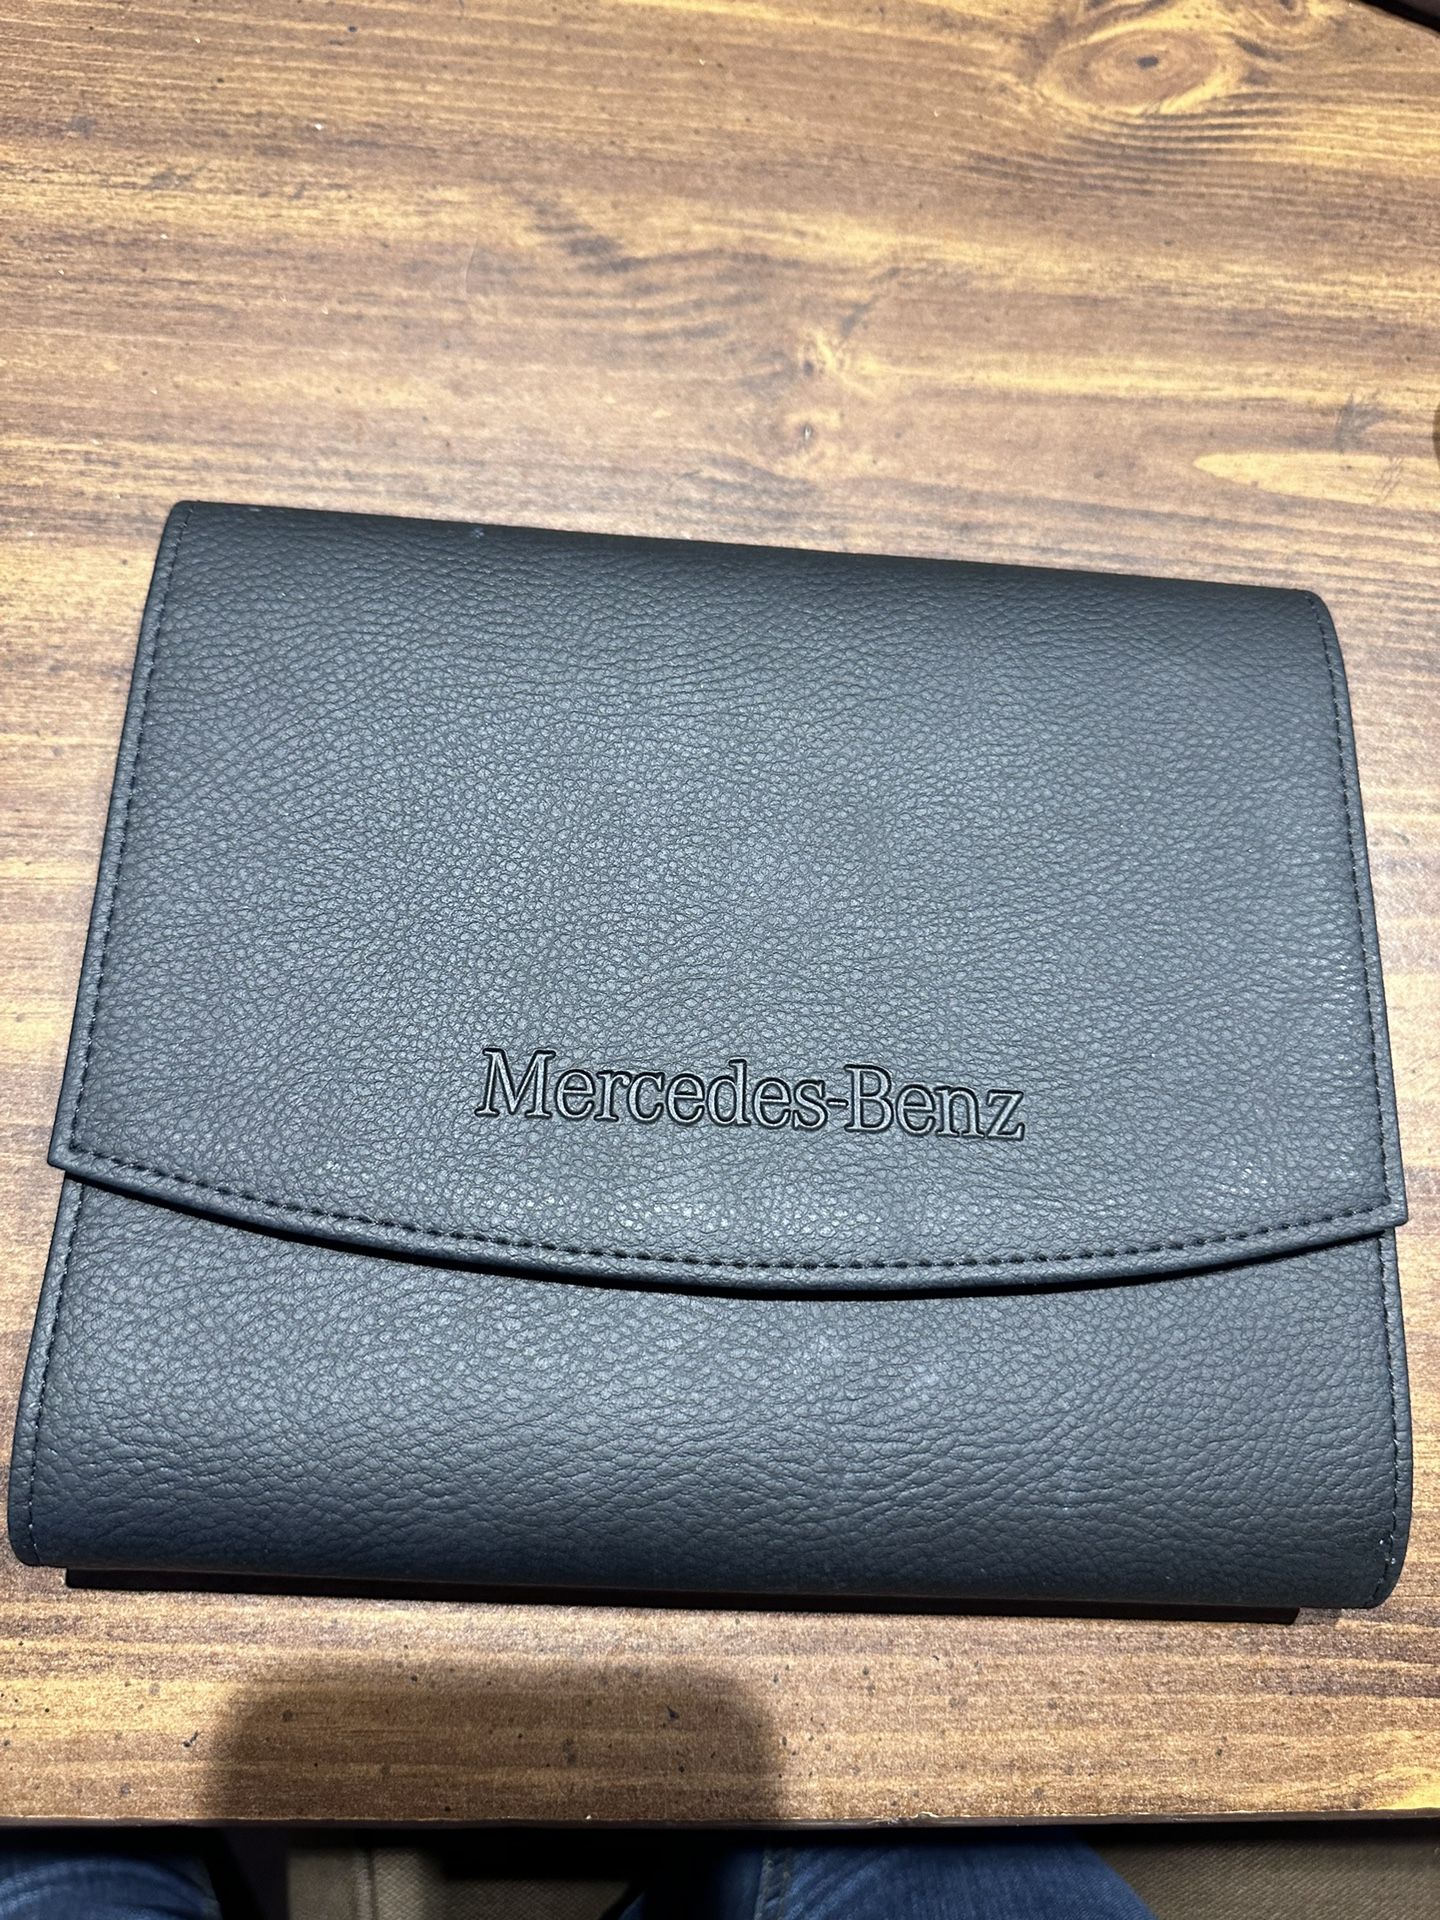 Mercedes Benz Leather Document Holder for Sale in Dallas, TX